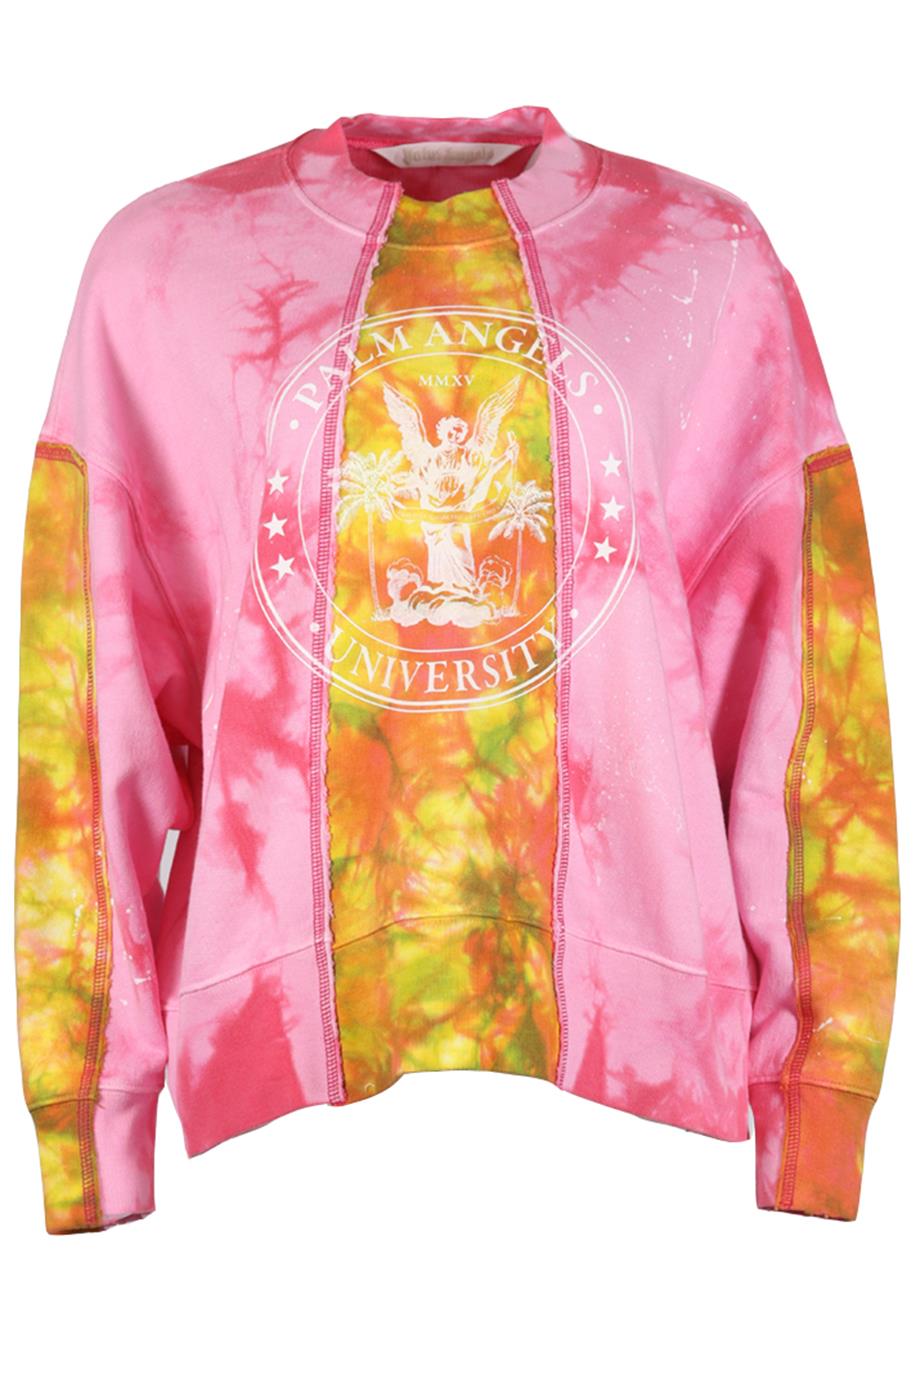 PALM ANGELS TIE DYED COTTON SWEATSHIRT SMALL